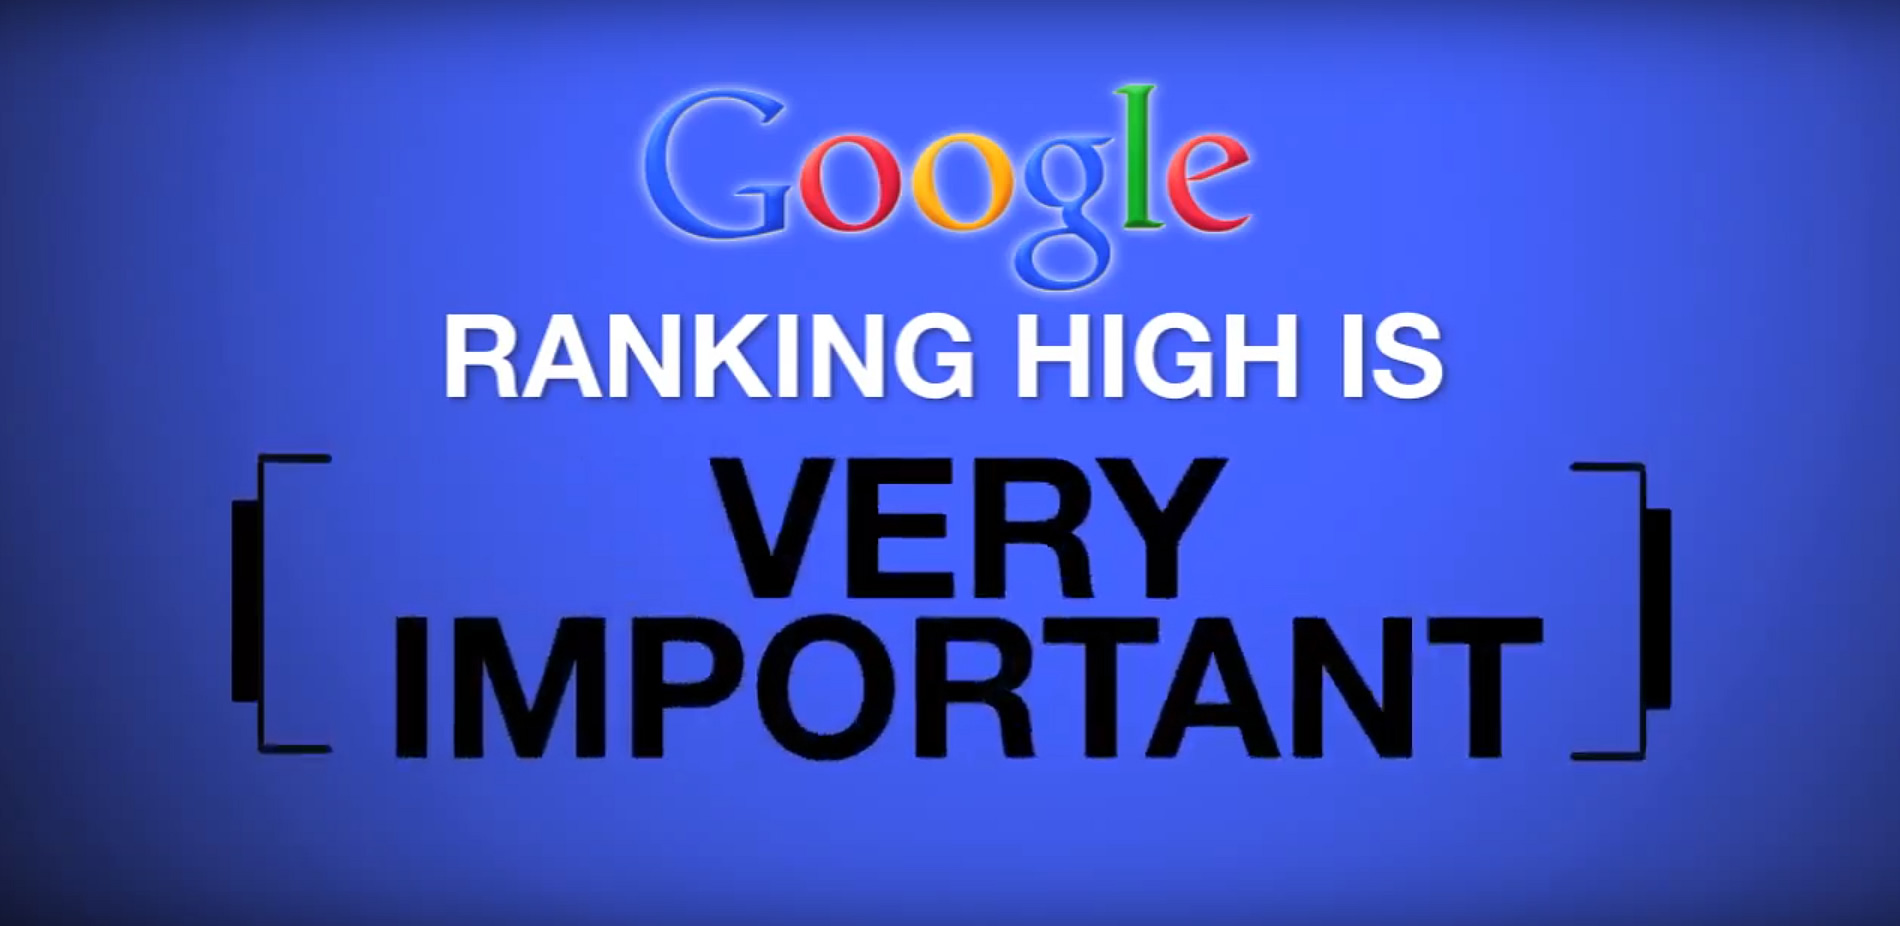 Ranking high on Google is very important.